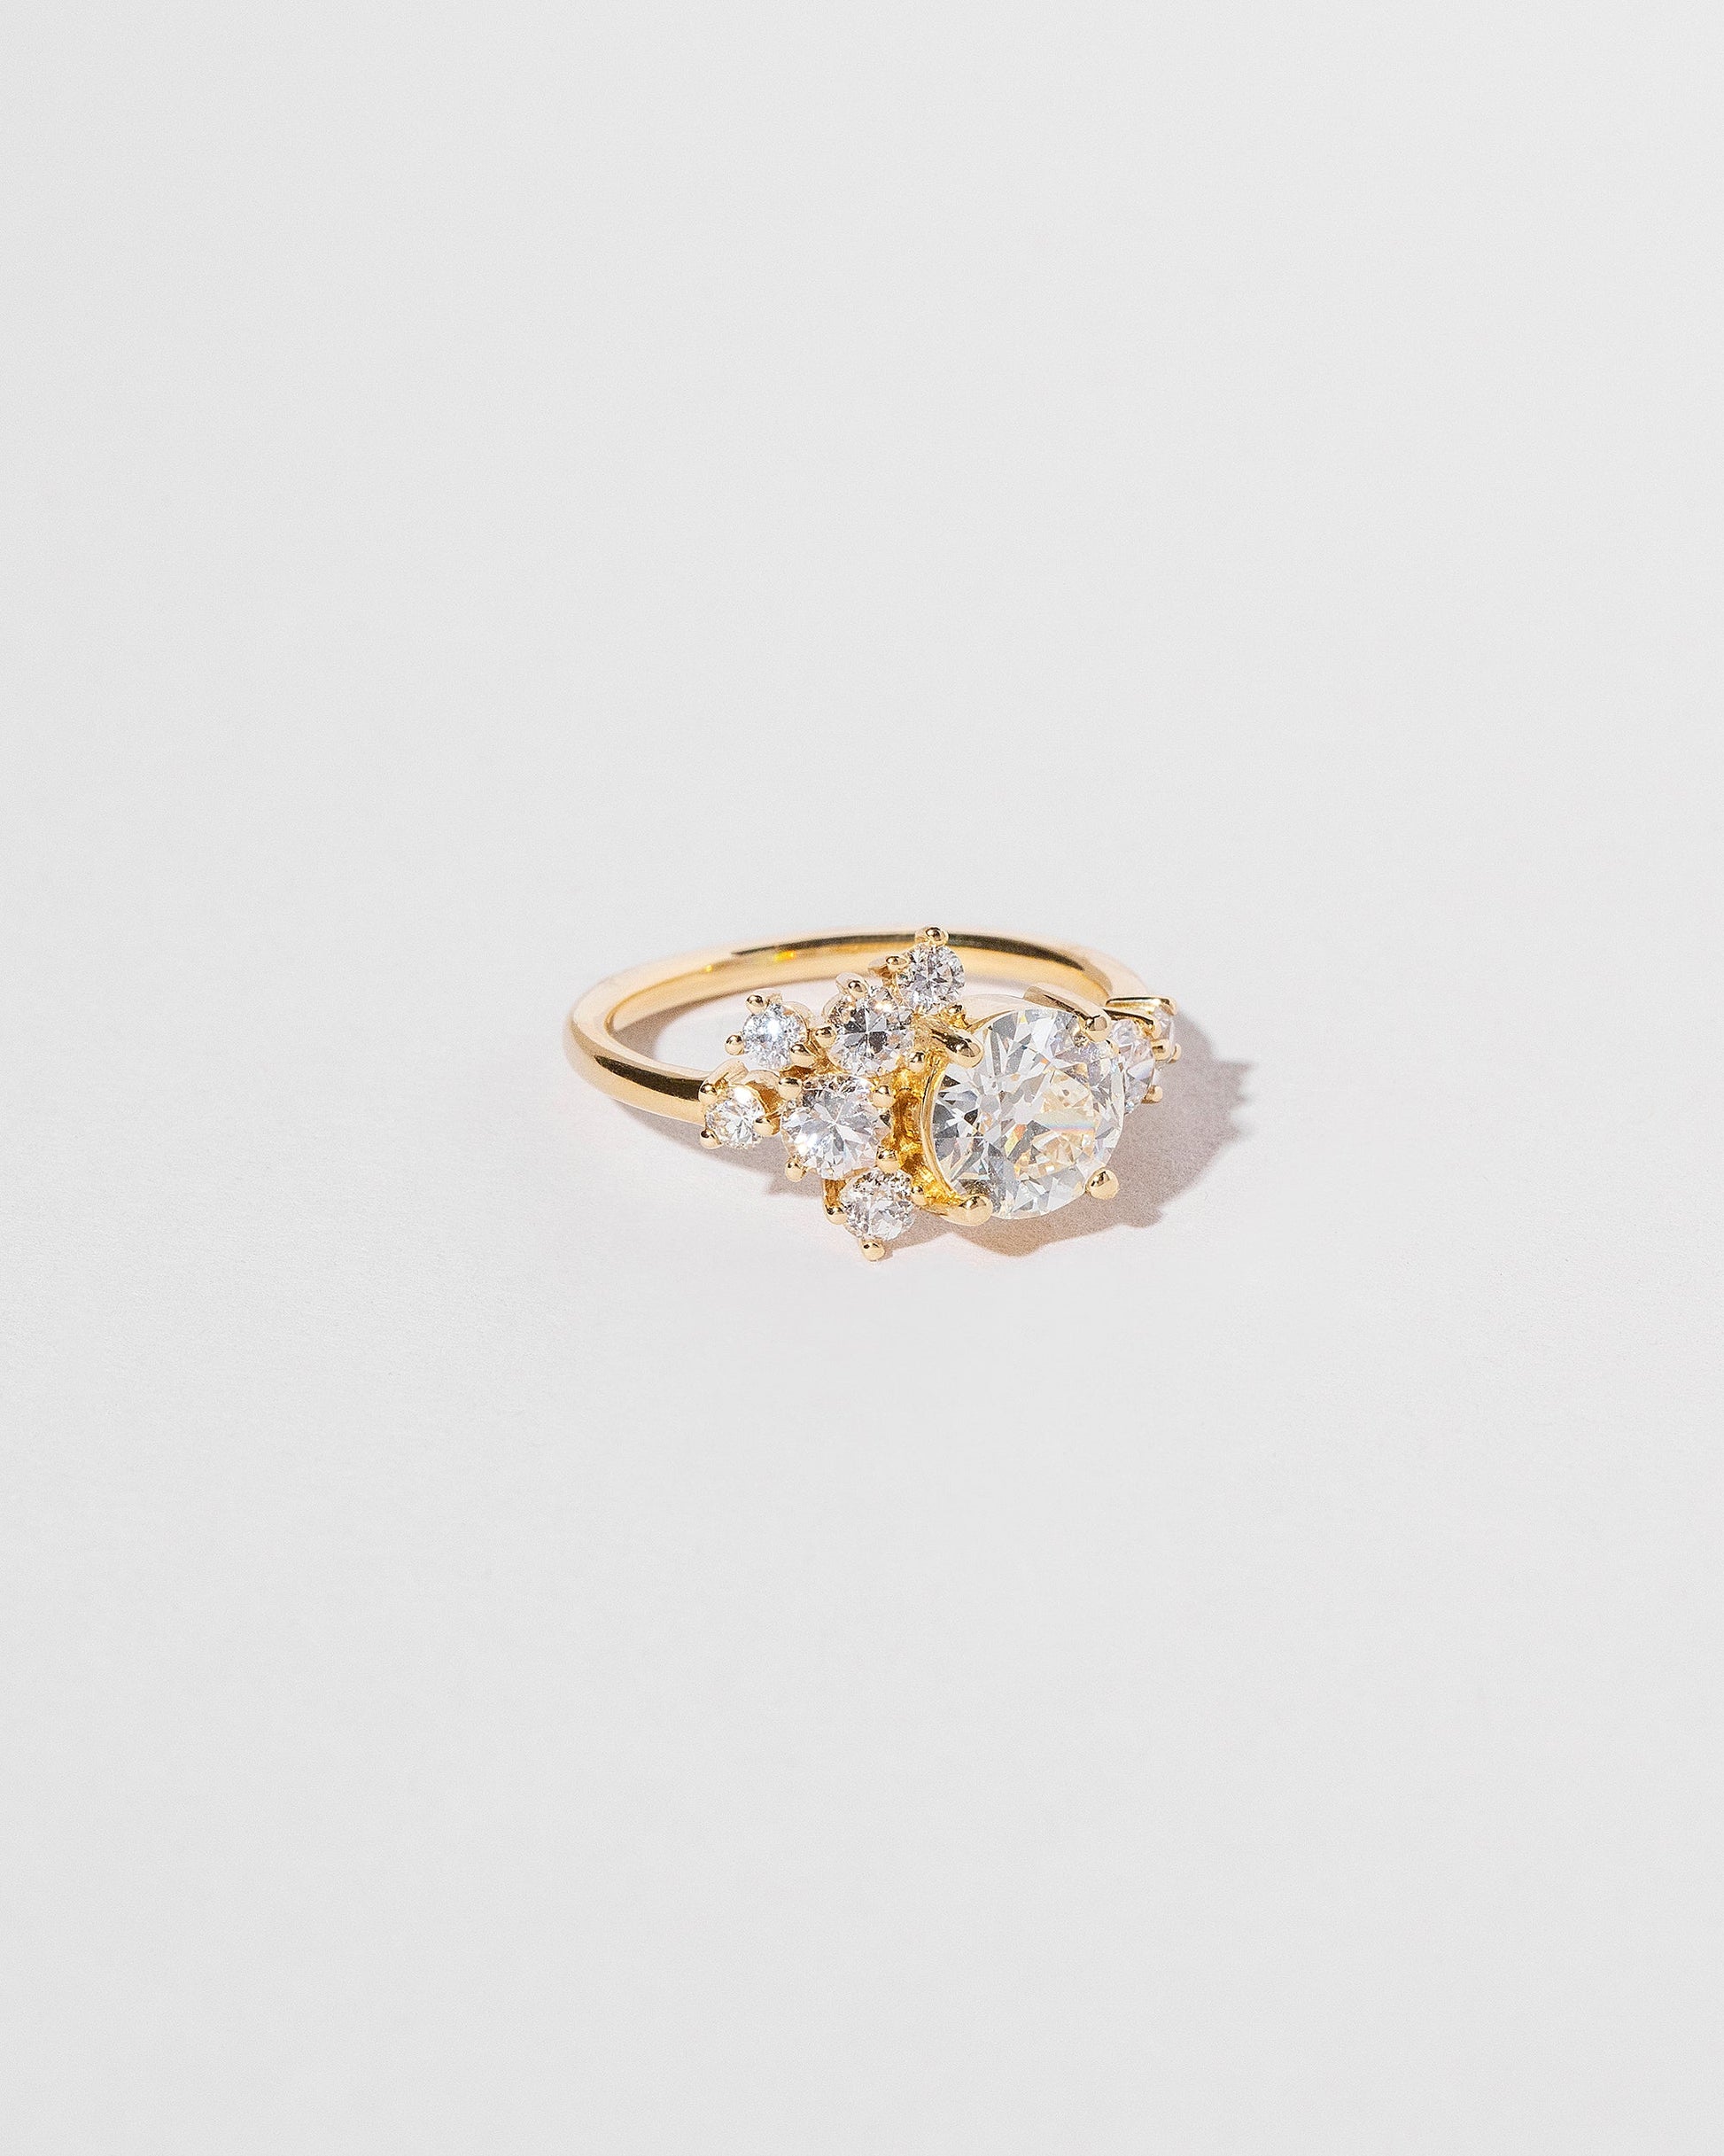 Cluster style ring with white diamonds set in 18k yellow gold, left side close up on light color background.